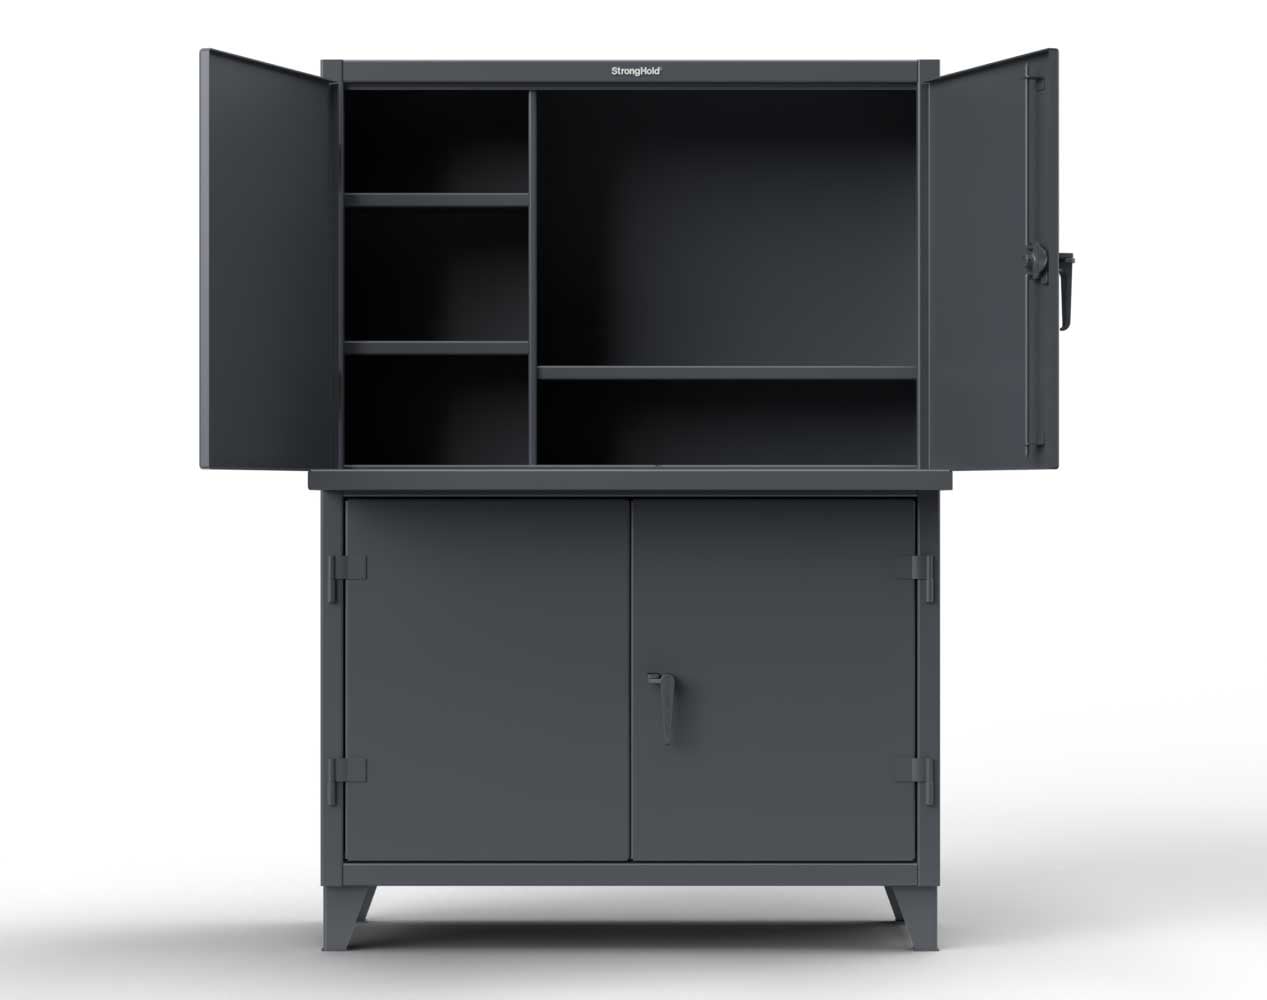 Extreme Duty 12 GA Multi-Compartment Computer Cabinet with 3 Shelves - 48 In. W x 24 In. D x 78 In. H